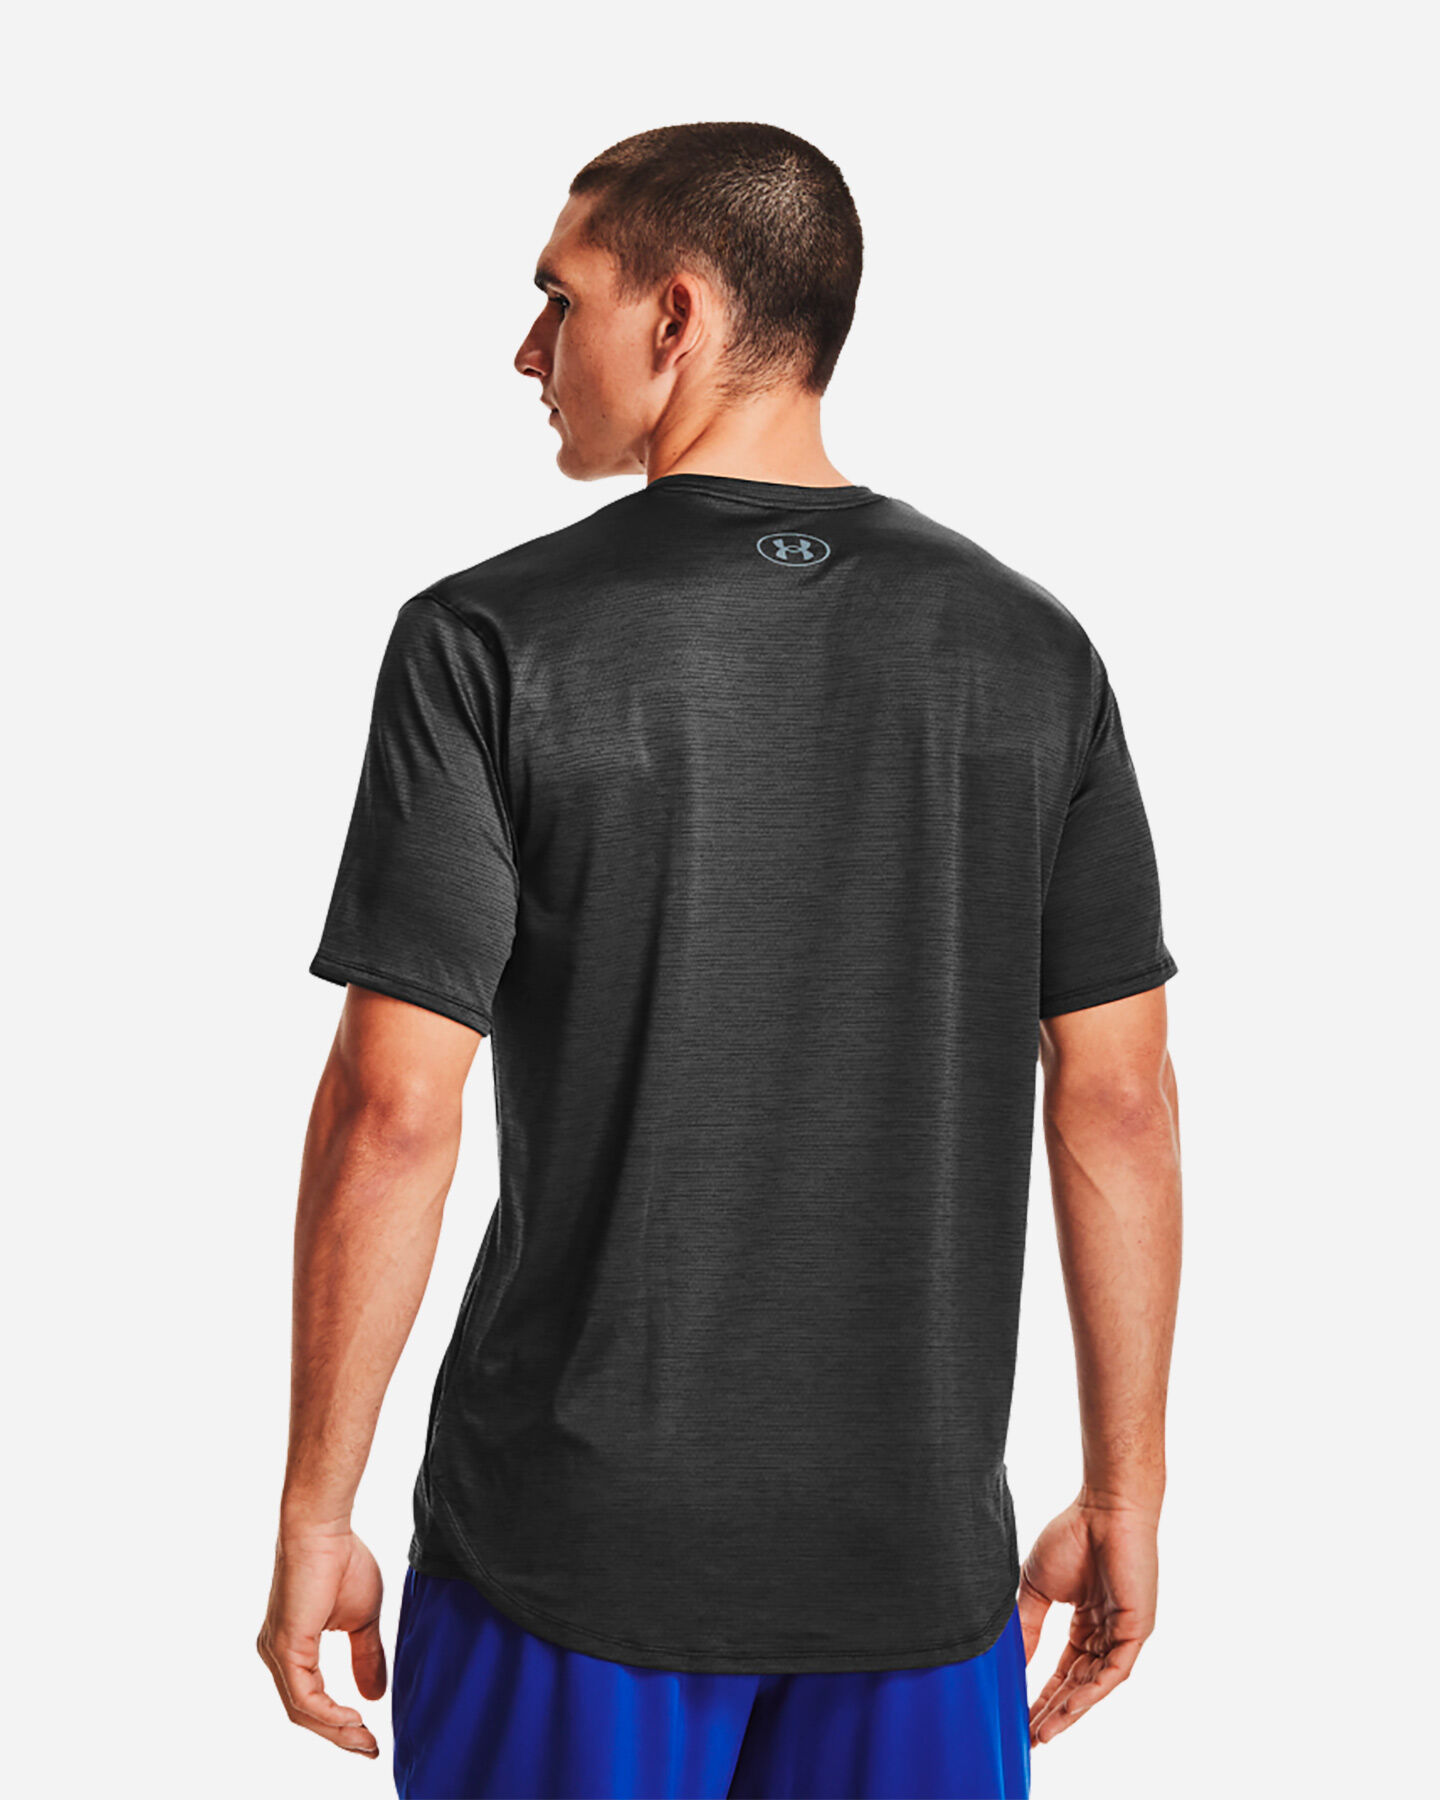  T-Shirt training UNDER ARMOUR TRAINING VENT 2.0 M S5287159|0001|SM scatto 1